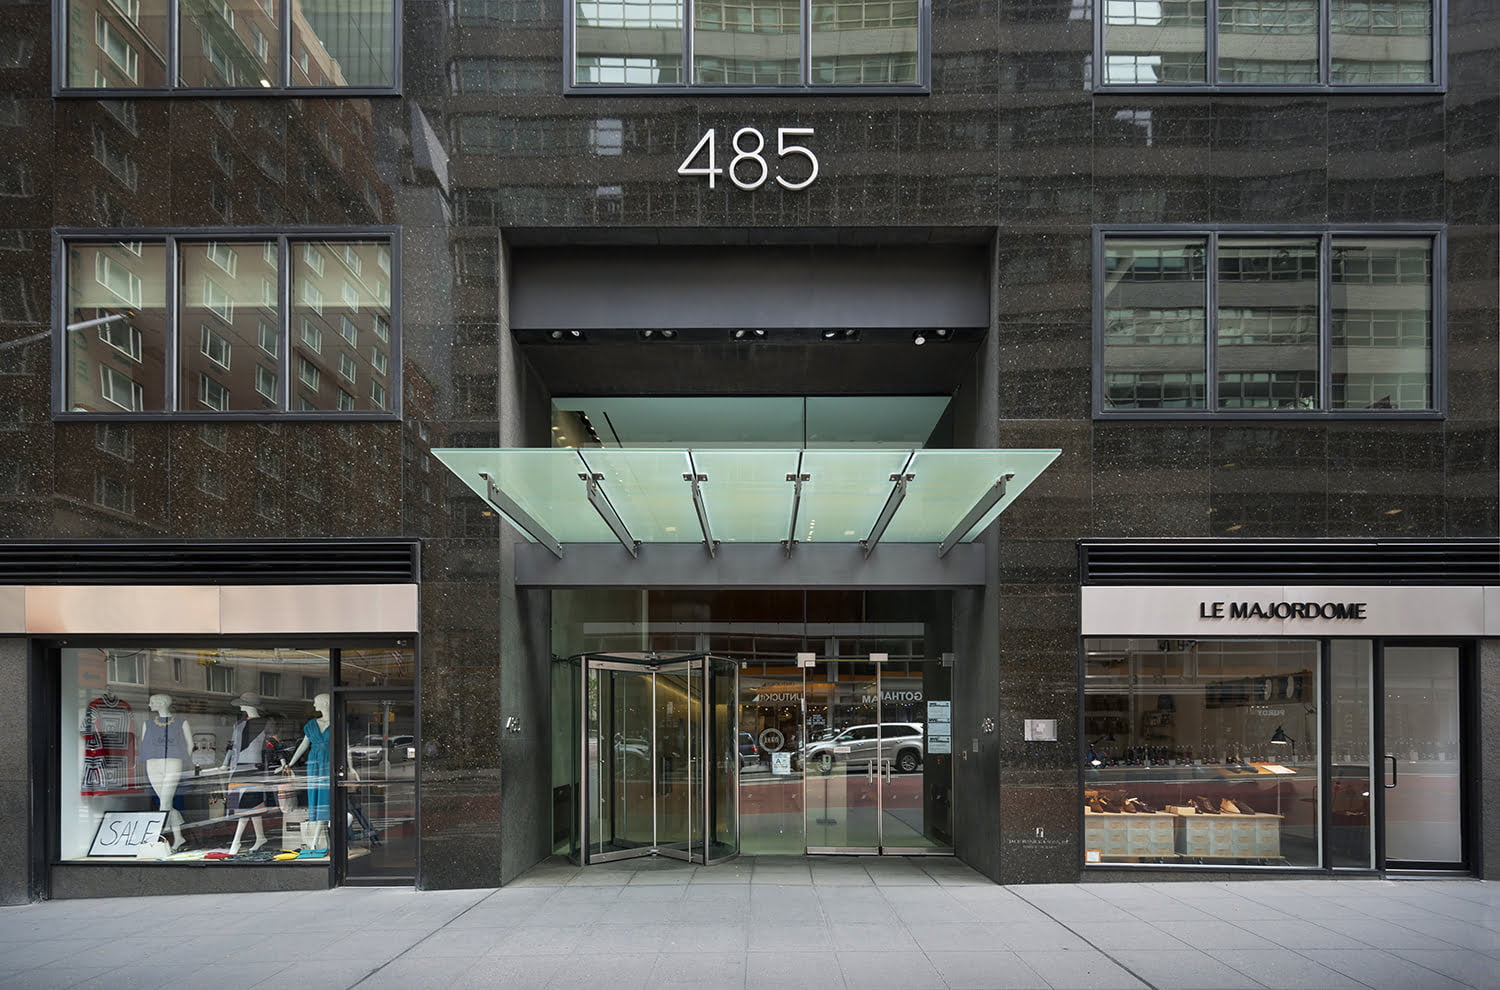 A view of the entrance to 485 Madison Avenue